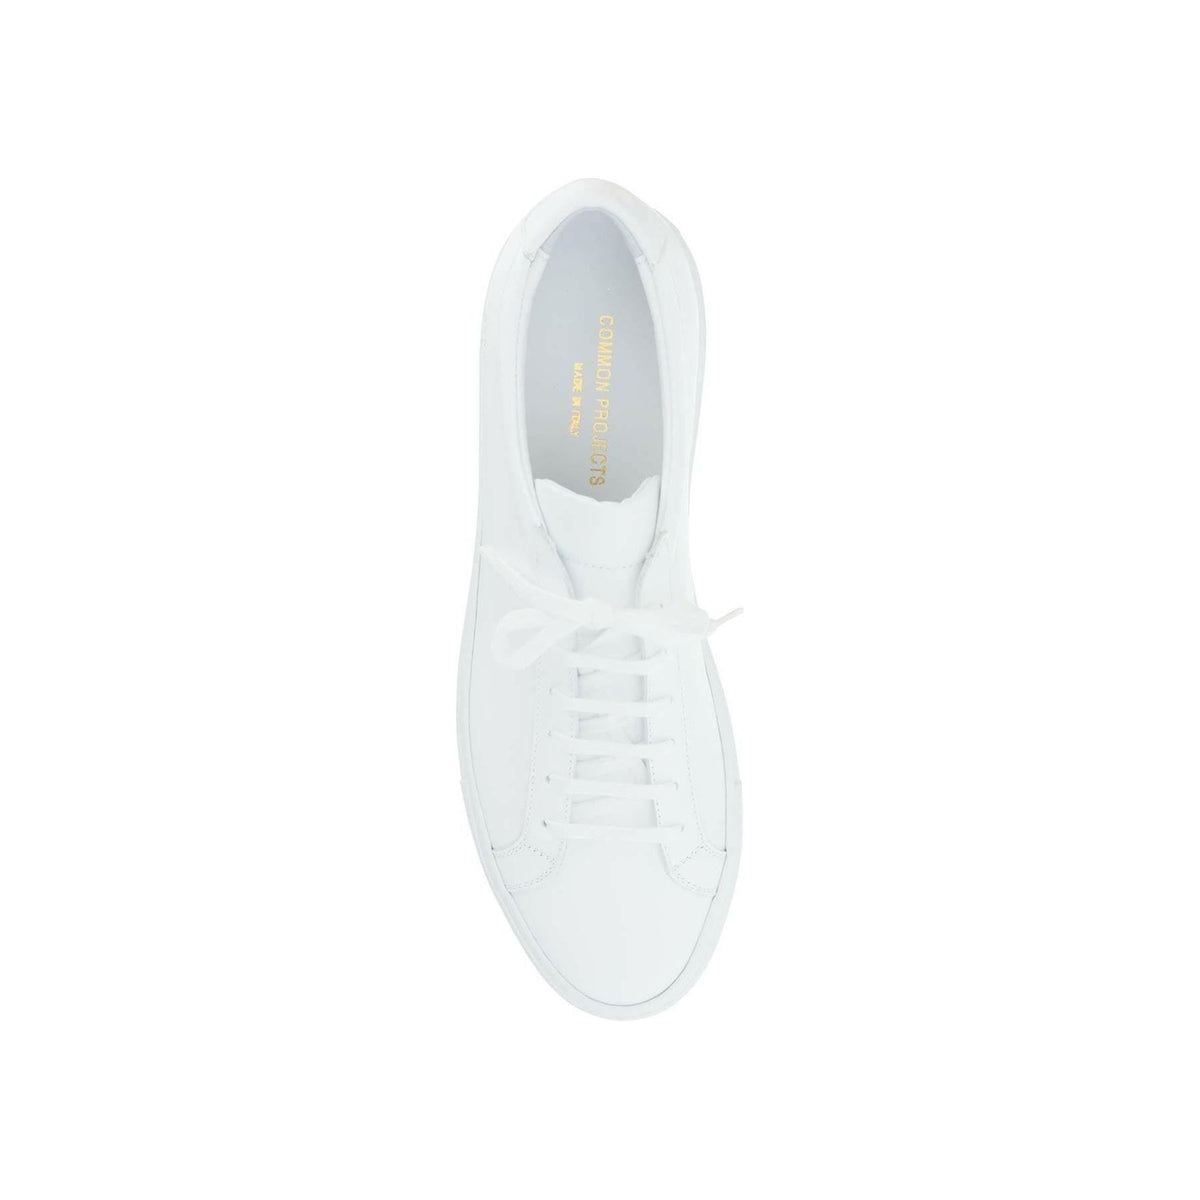 COMMON PROJECTS - White Original Achilles Low-Top Leather Sneakers - JOHN JULIA